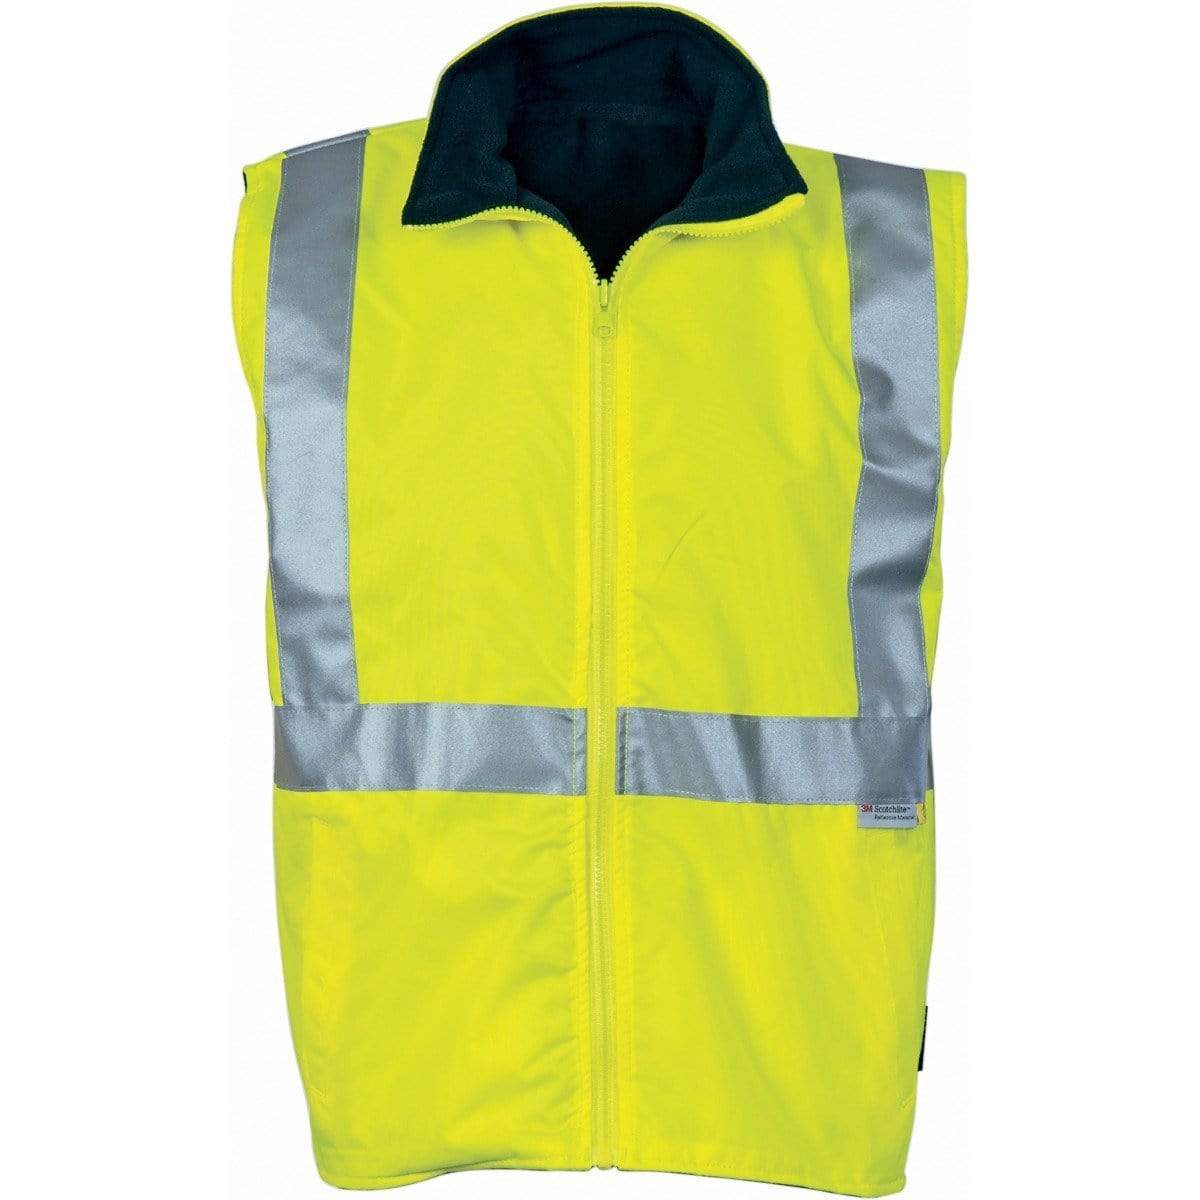 Hi-vis Reversible Vest With 3m Reflective Tape -yellow/navy-s - 3865 Work Wear DNC Workwear   